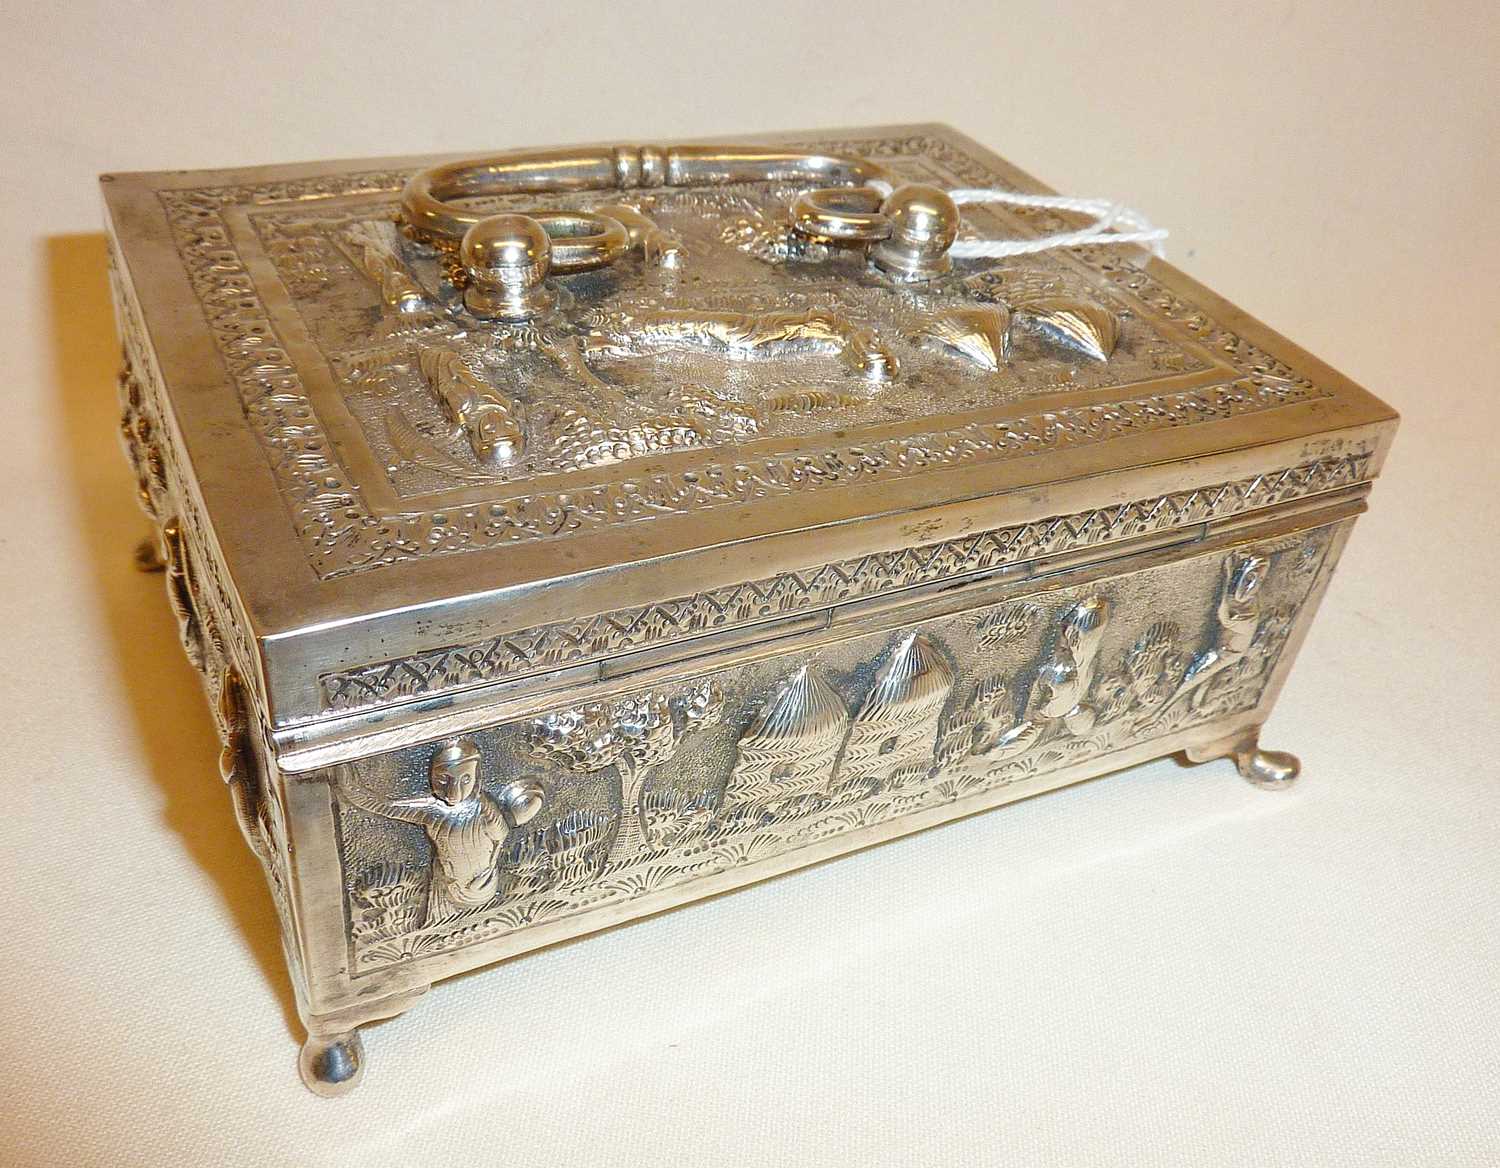 Indian silver casket with figural and jungle scenes, Lucknow, c. 1900, approx. 12cm long and 6.5cm - Image 2 of 4